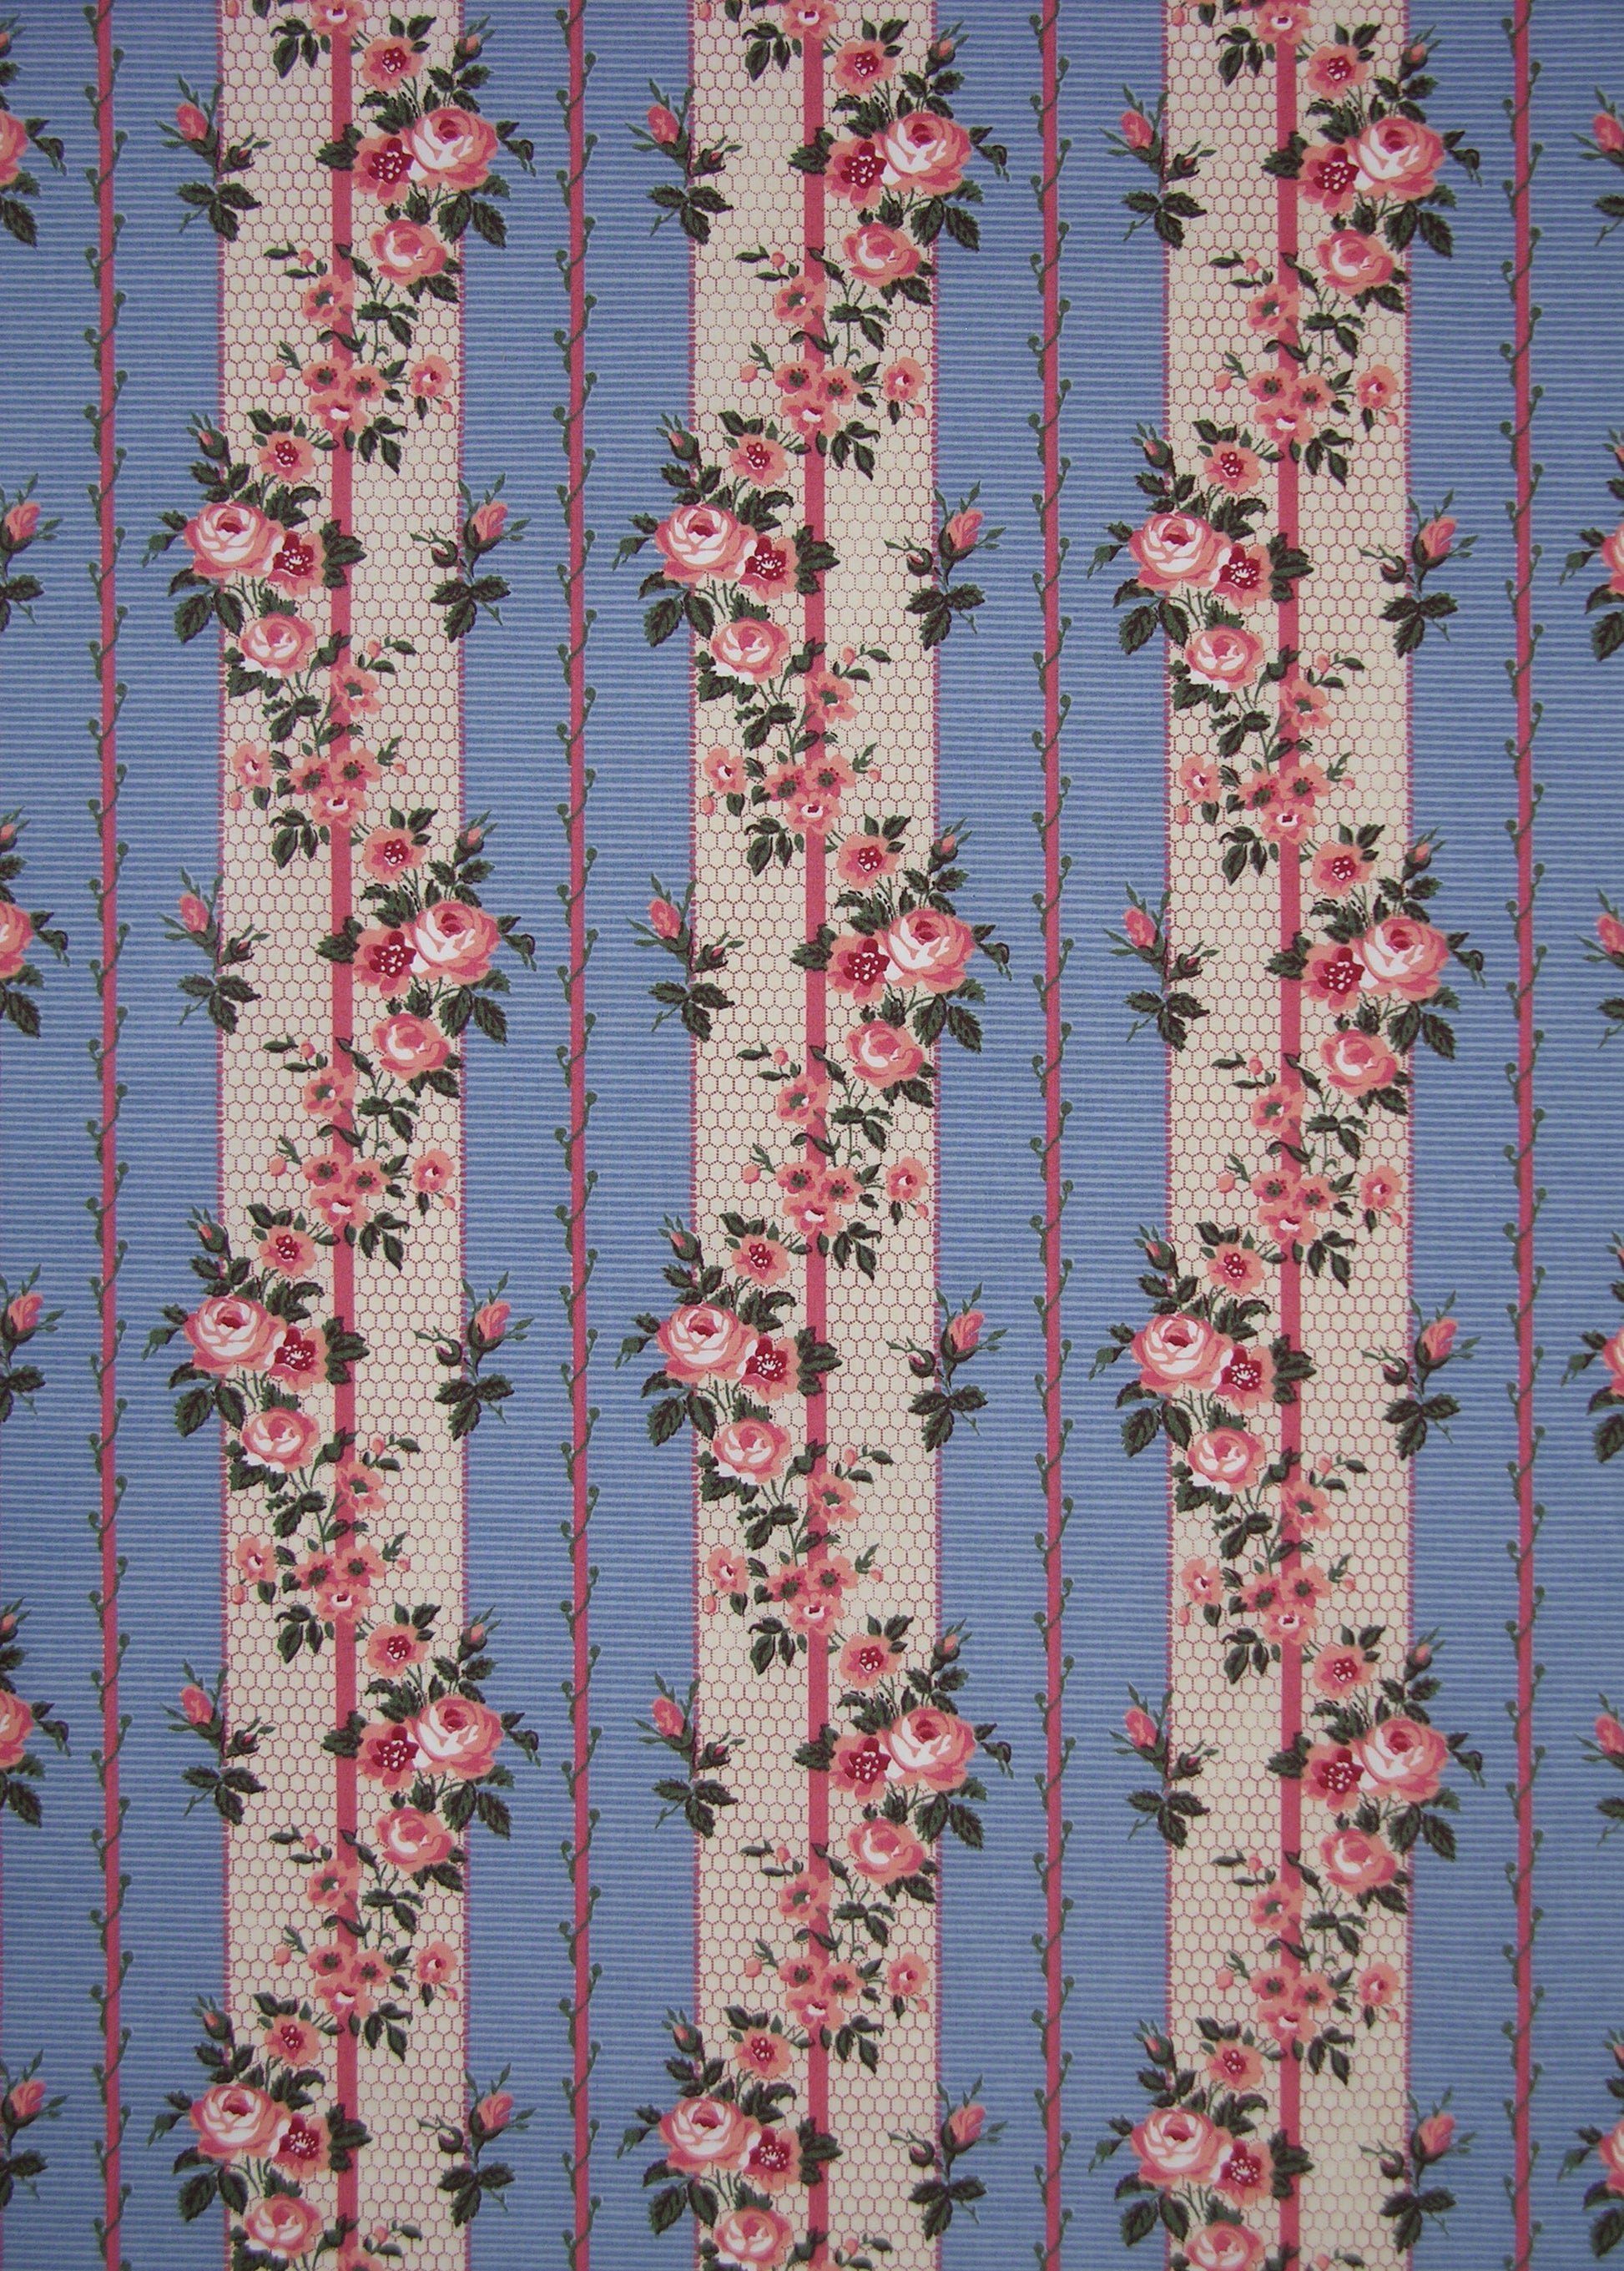 blue striped fabric with printed roses and vines entwining the stripes